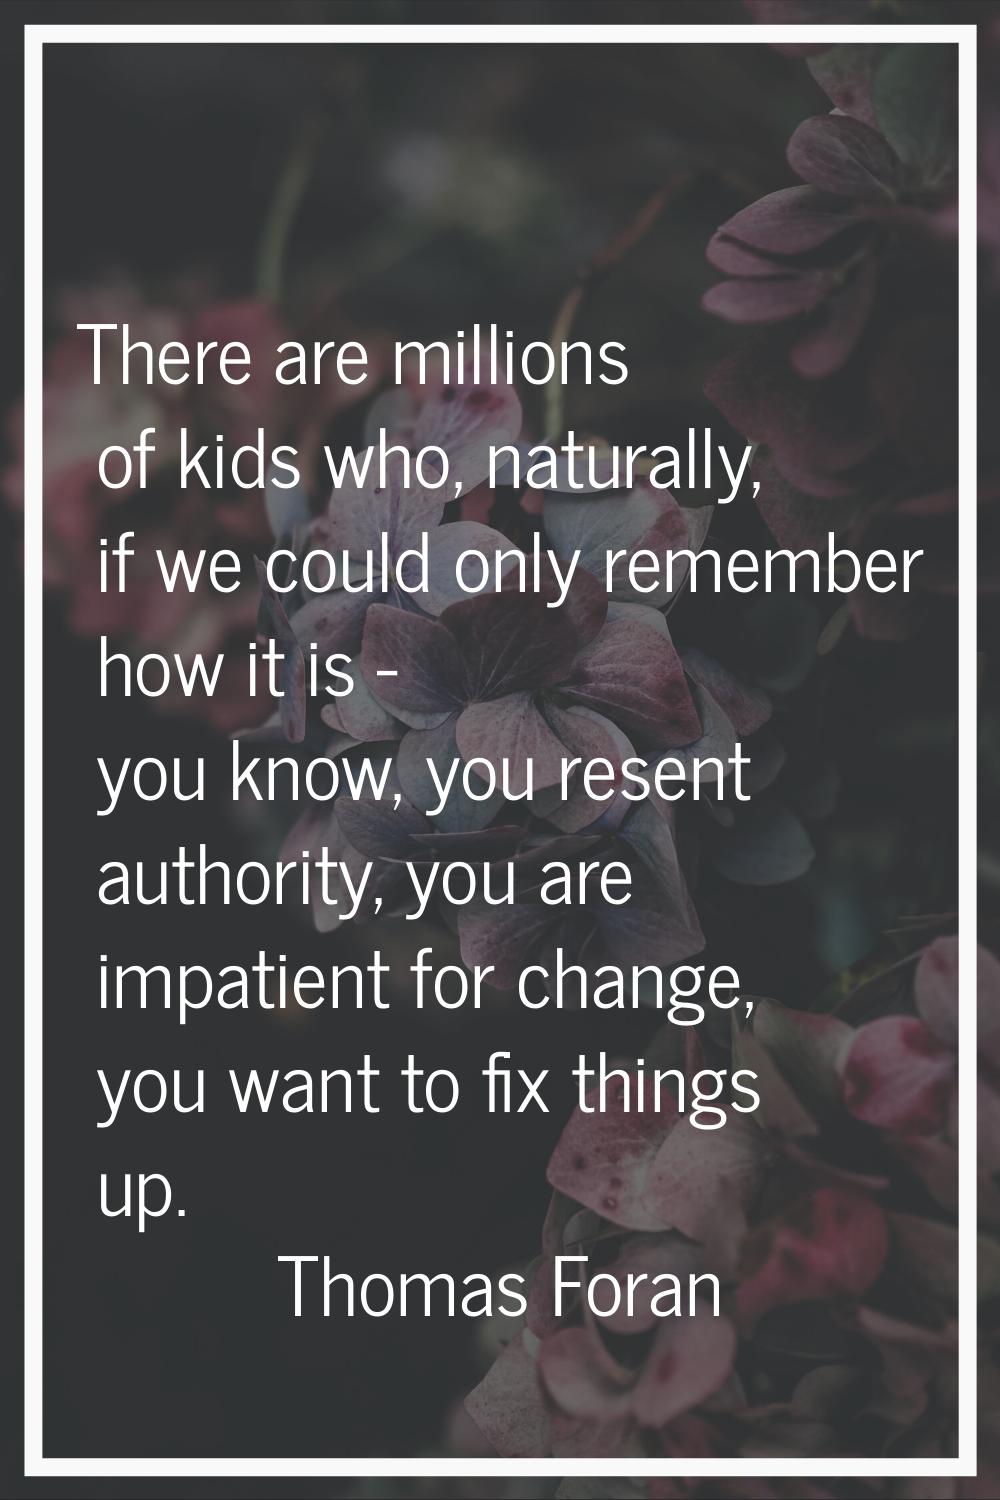 There are millions of kids who, naturally, if we could only remember how it is - you know, you rese